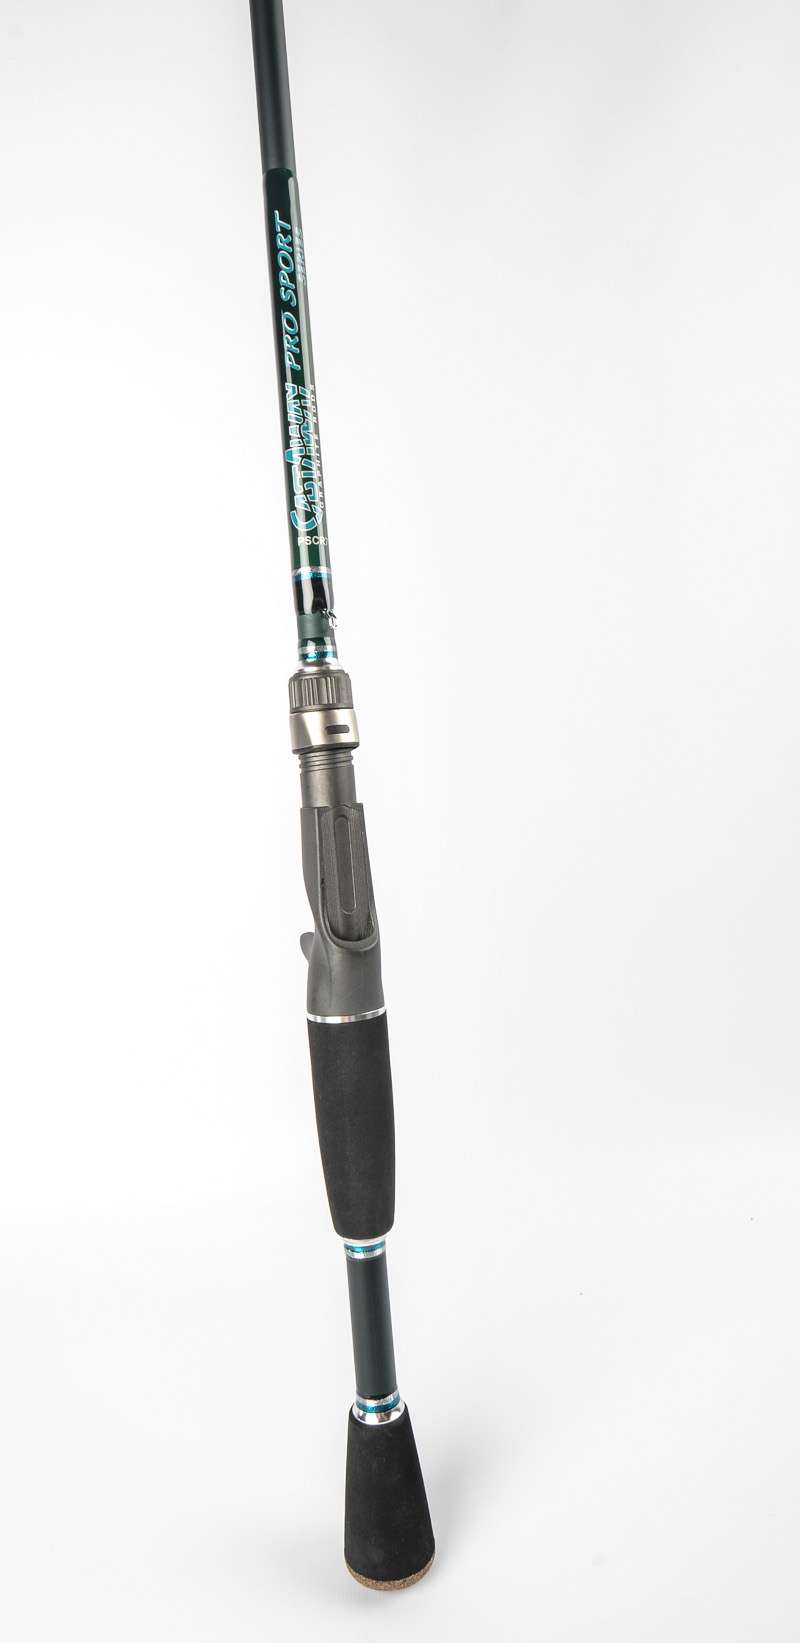 <p>Castaway Pro Sport Medium Fast Casting</p>
The Medium Fast Casting Rod from the Castaway Rods Pro Sport Series features 24-Ton, IM7 carbon fiber, a CA Resin System, Forecast SS304 Stainless Guides/Compression Rings to deliver maximum performance, Split EVA Light-Core handles, Sensa-Touch locking reel seat, and CastAway Static Zoned Guide Spacing for max casting distance. This rod retails at $79.99.
